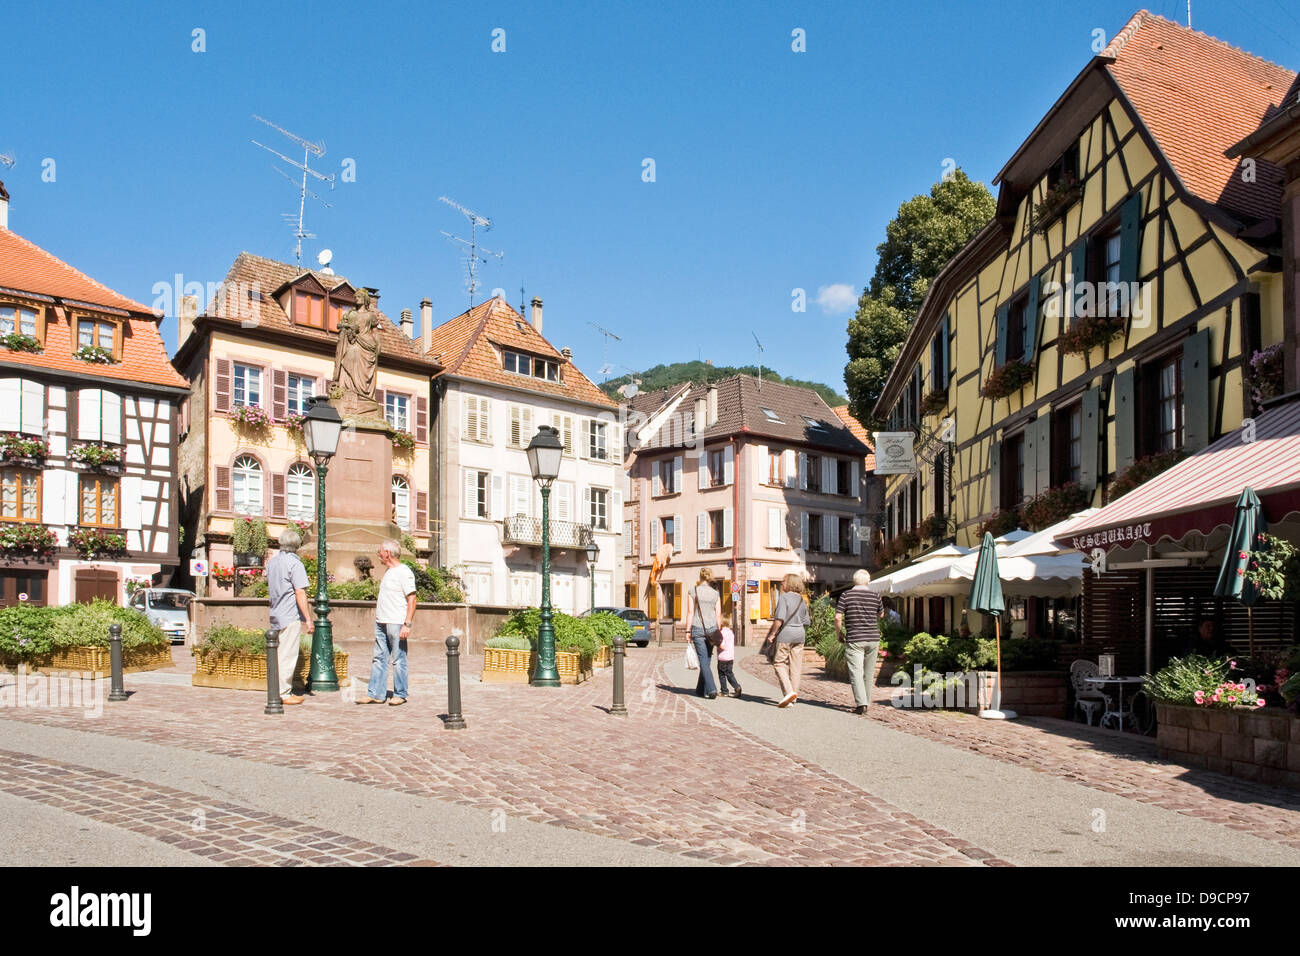 Half-timbered houses in the Old Town of Ribeauville, Half-timbered houses in the old town of Ribeauville, Stock Photo